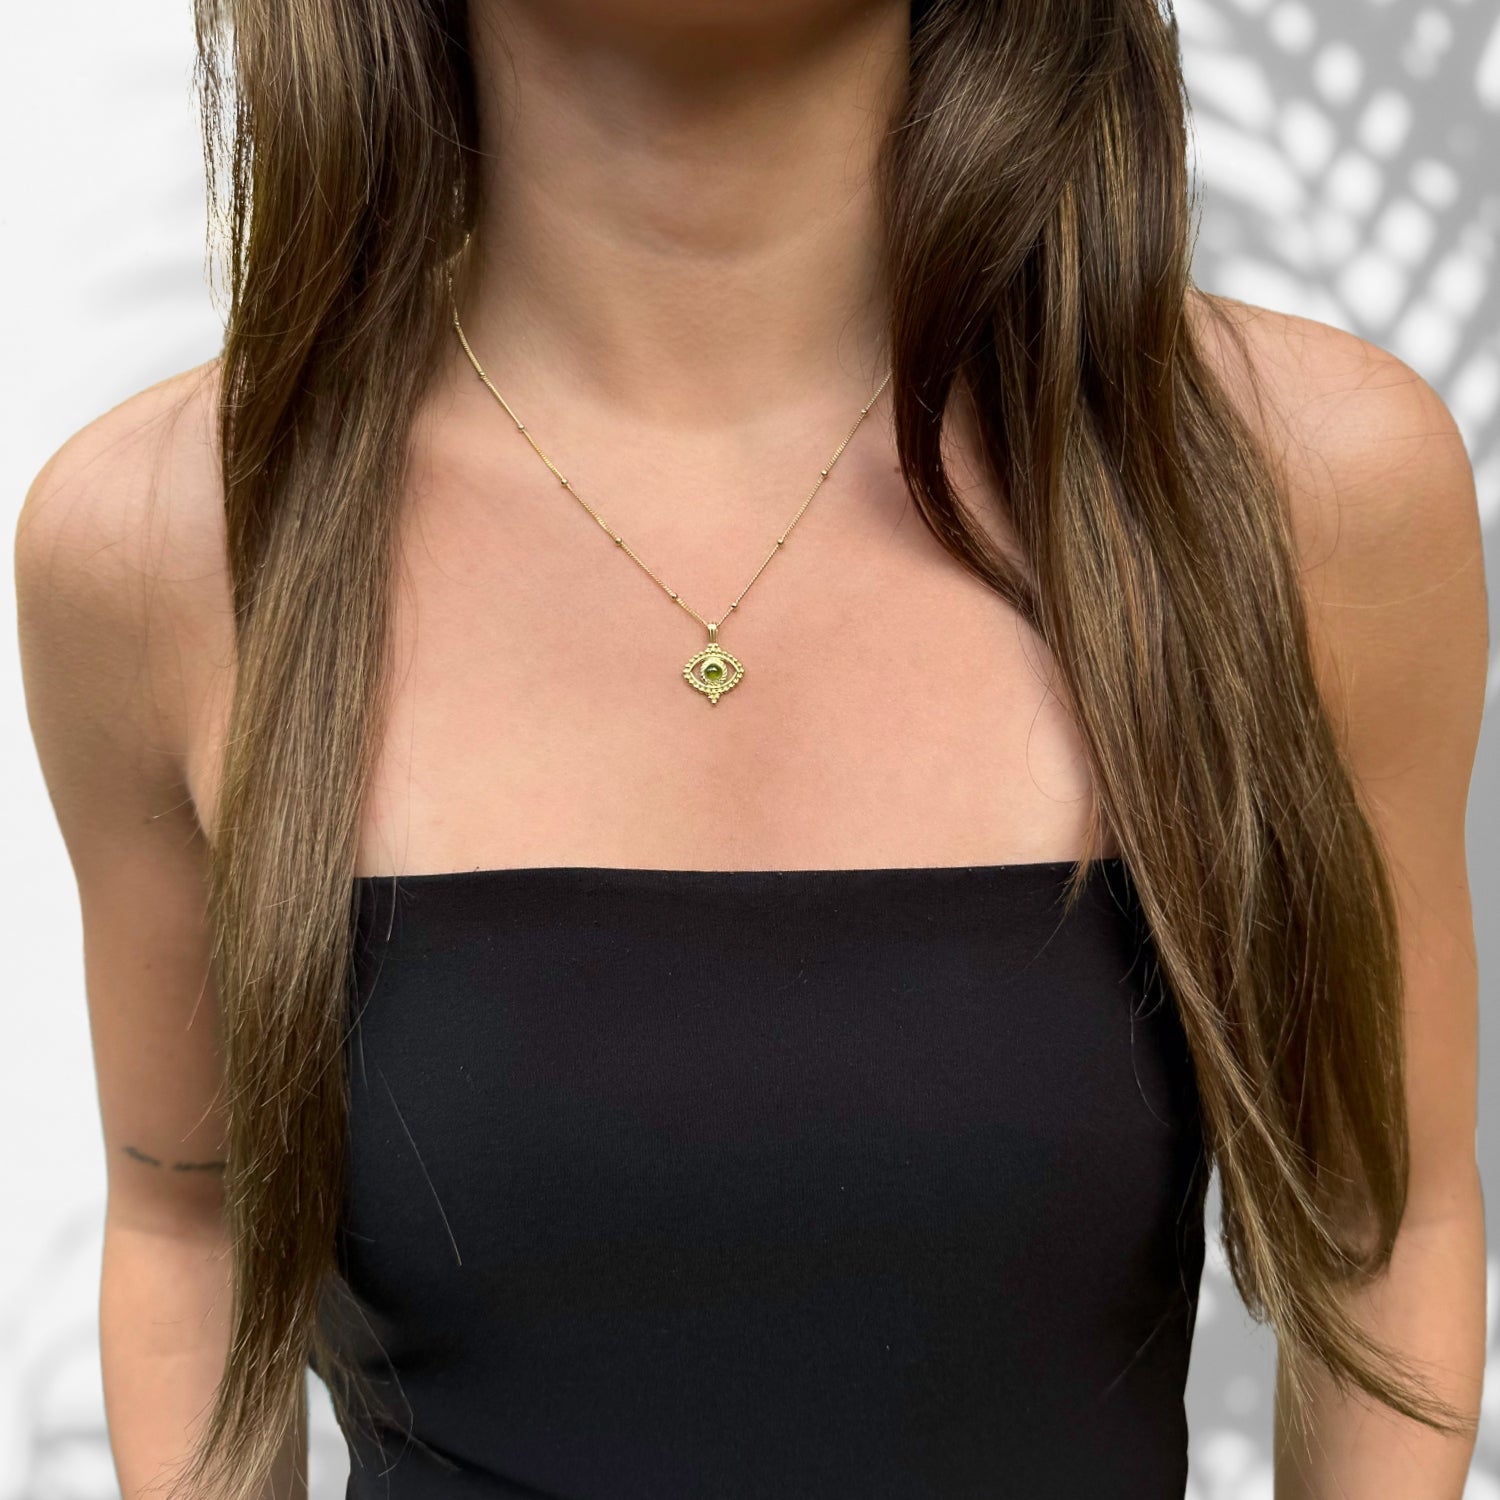 Captivating Beauty: Model Wearing Gold Chain with Tourmaline Pendant